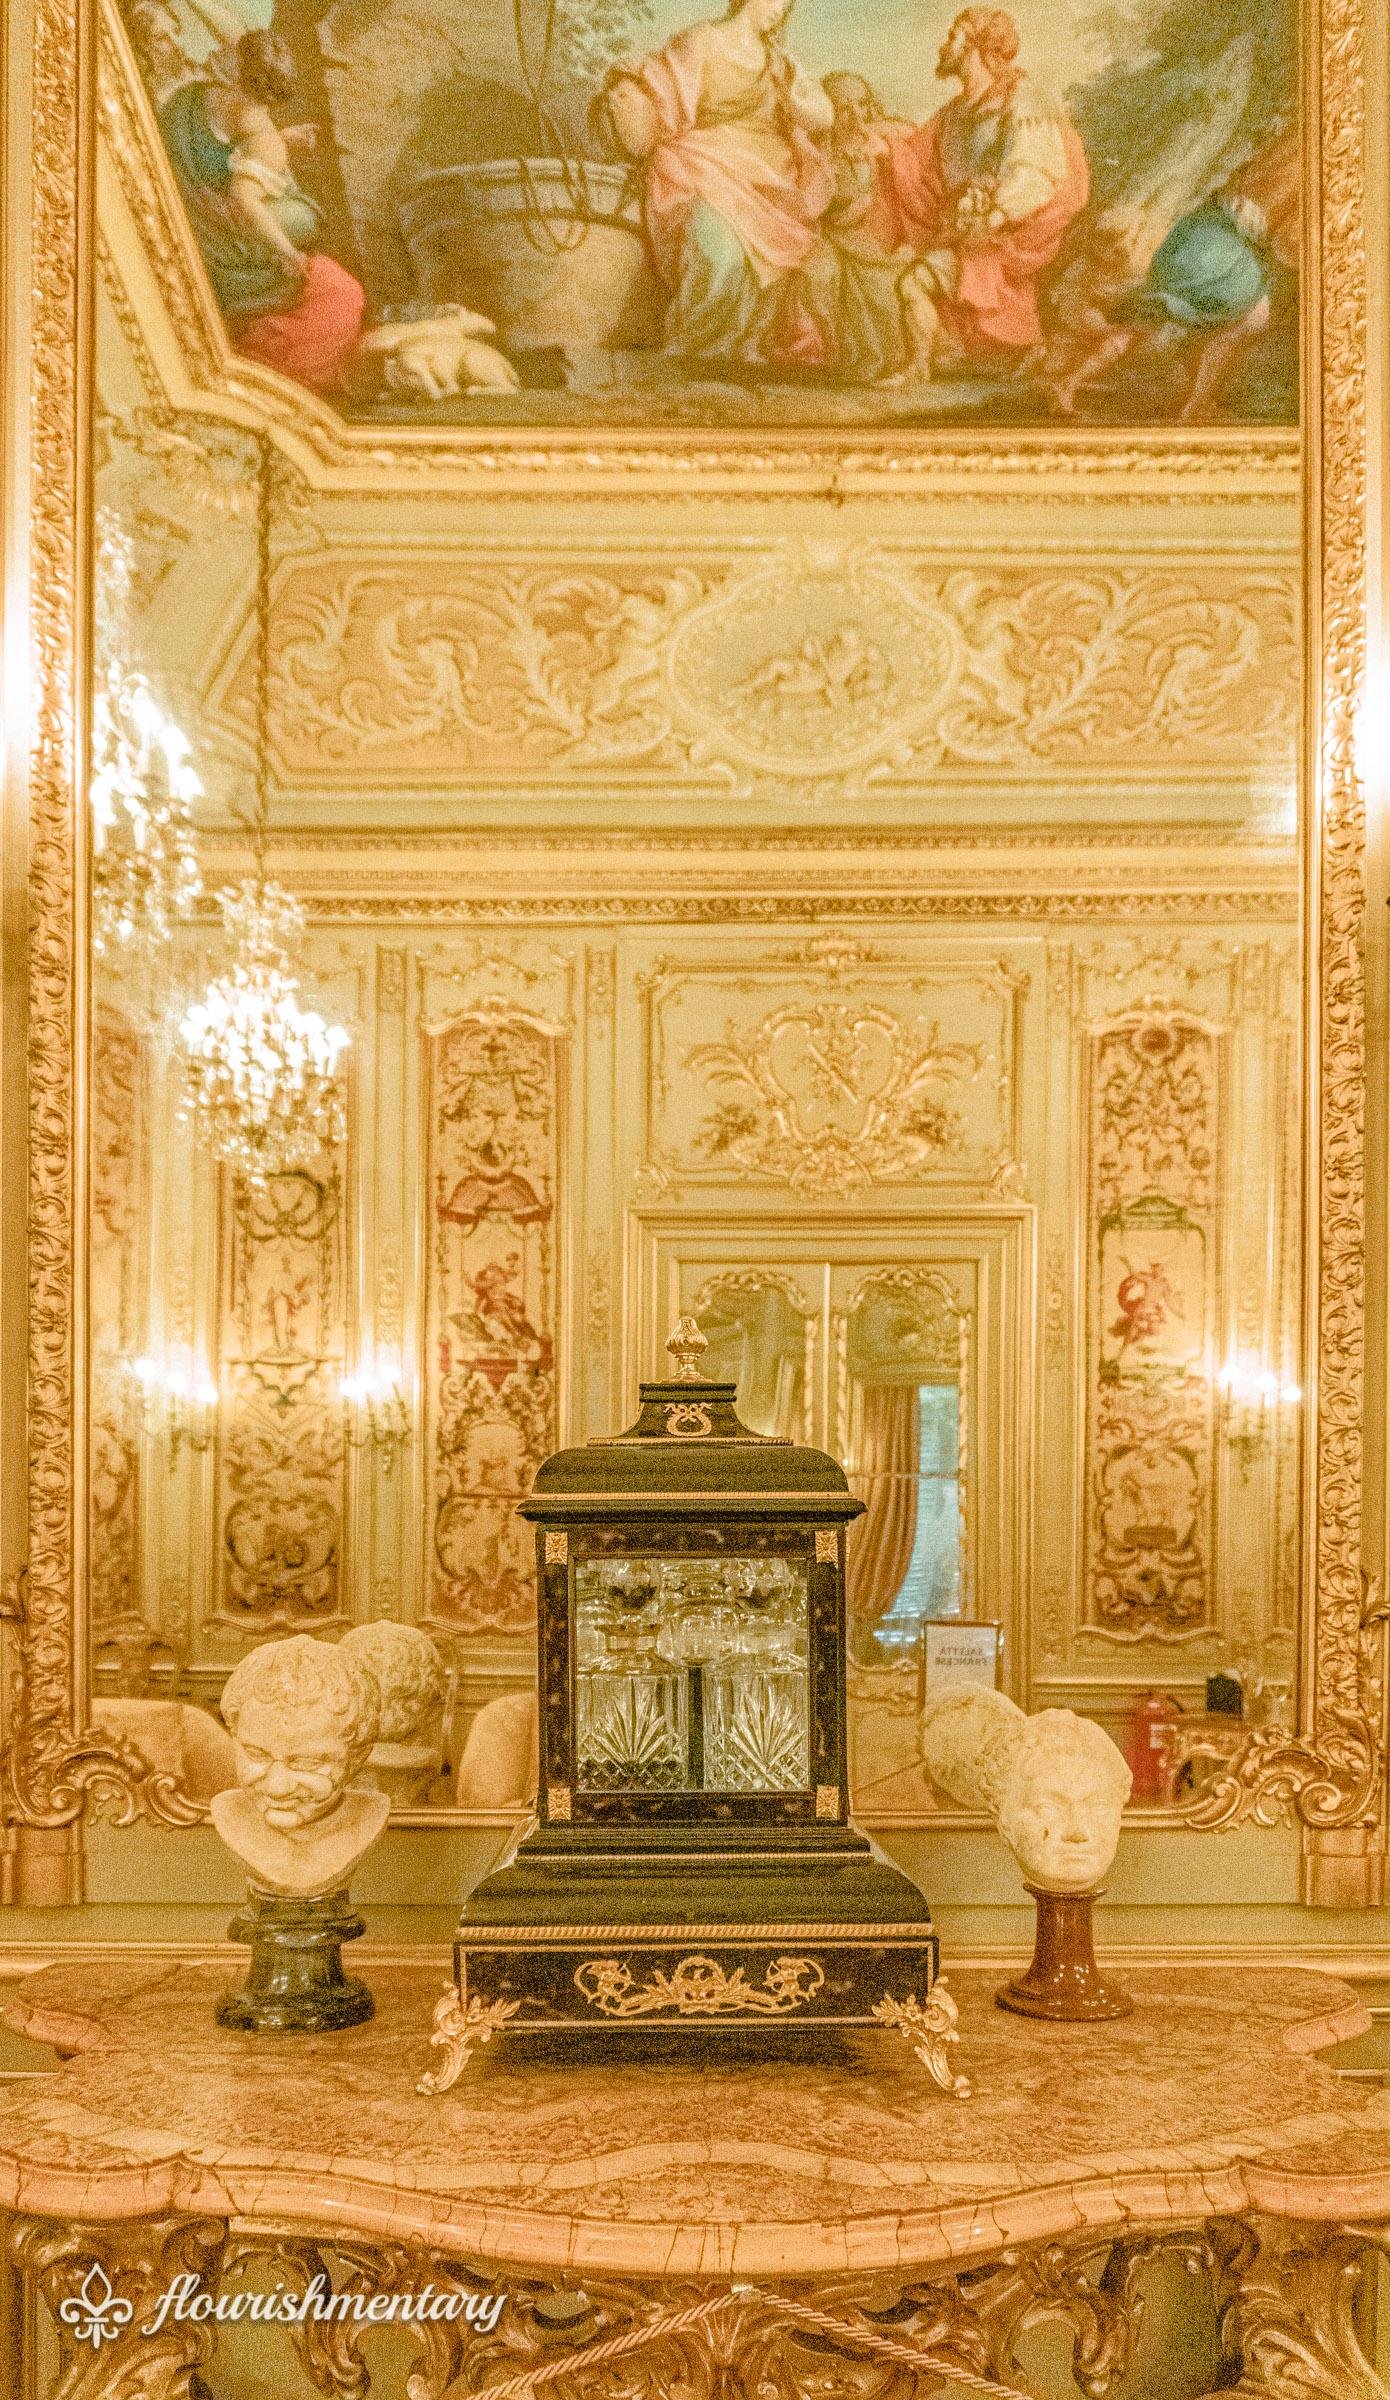 Decorative antiques inside the private apartments